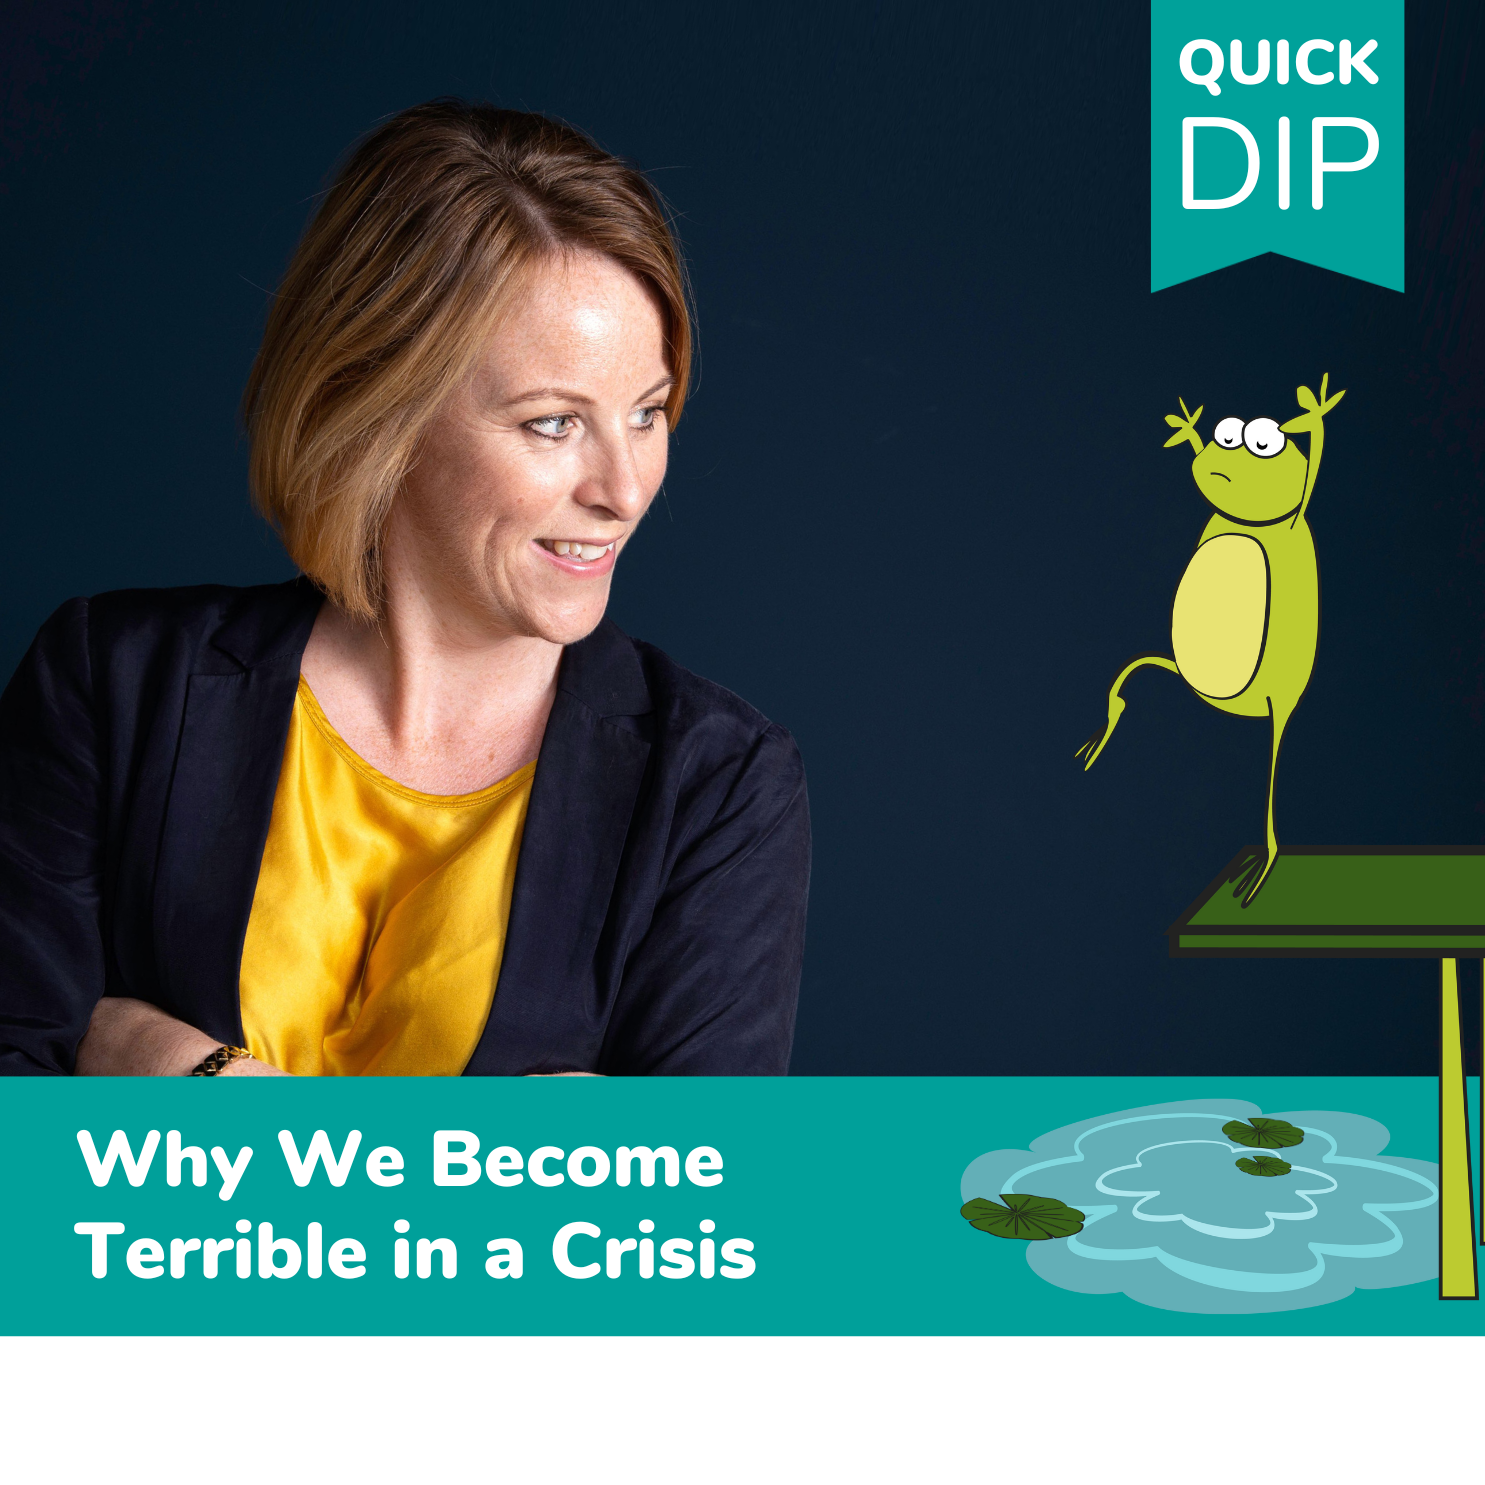 Why We Become Terrible in a Crisis